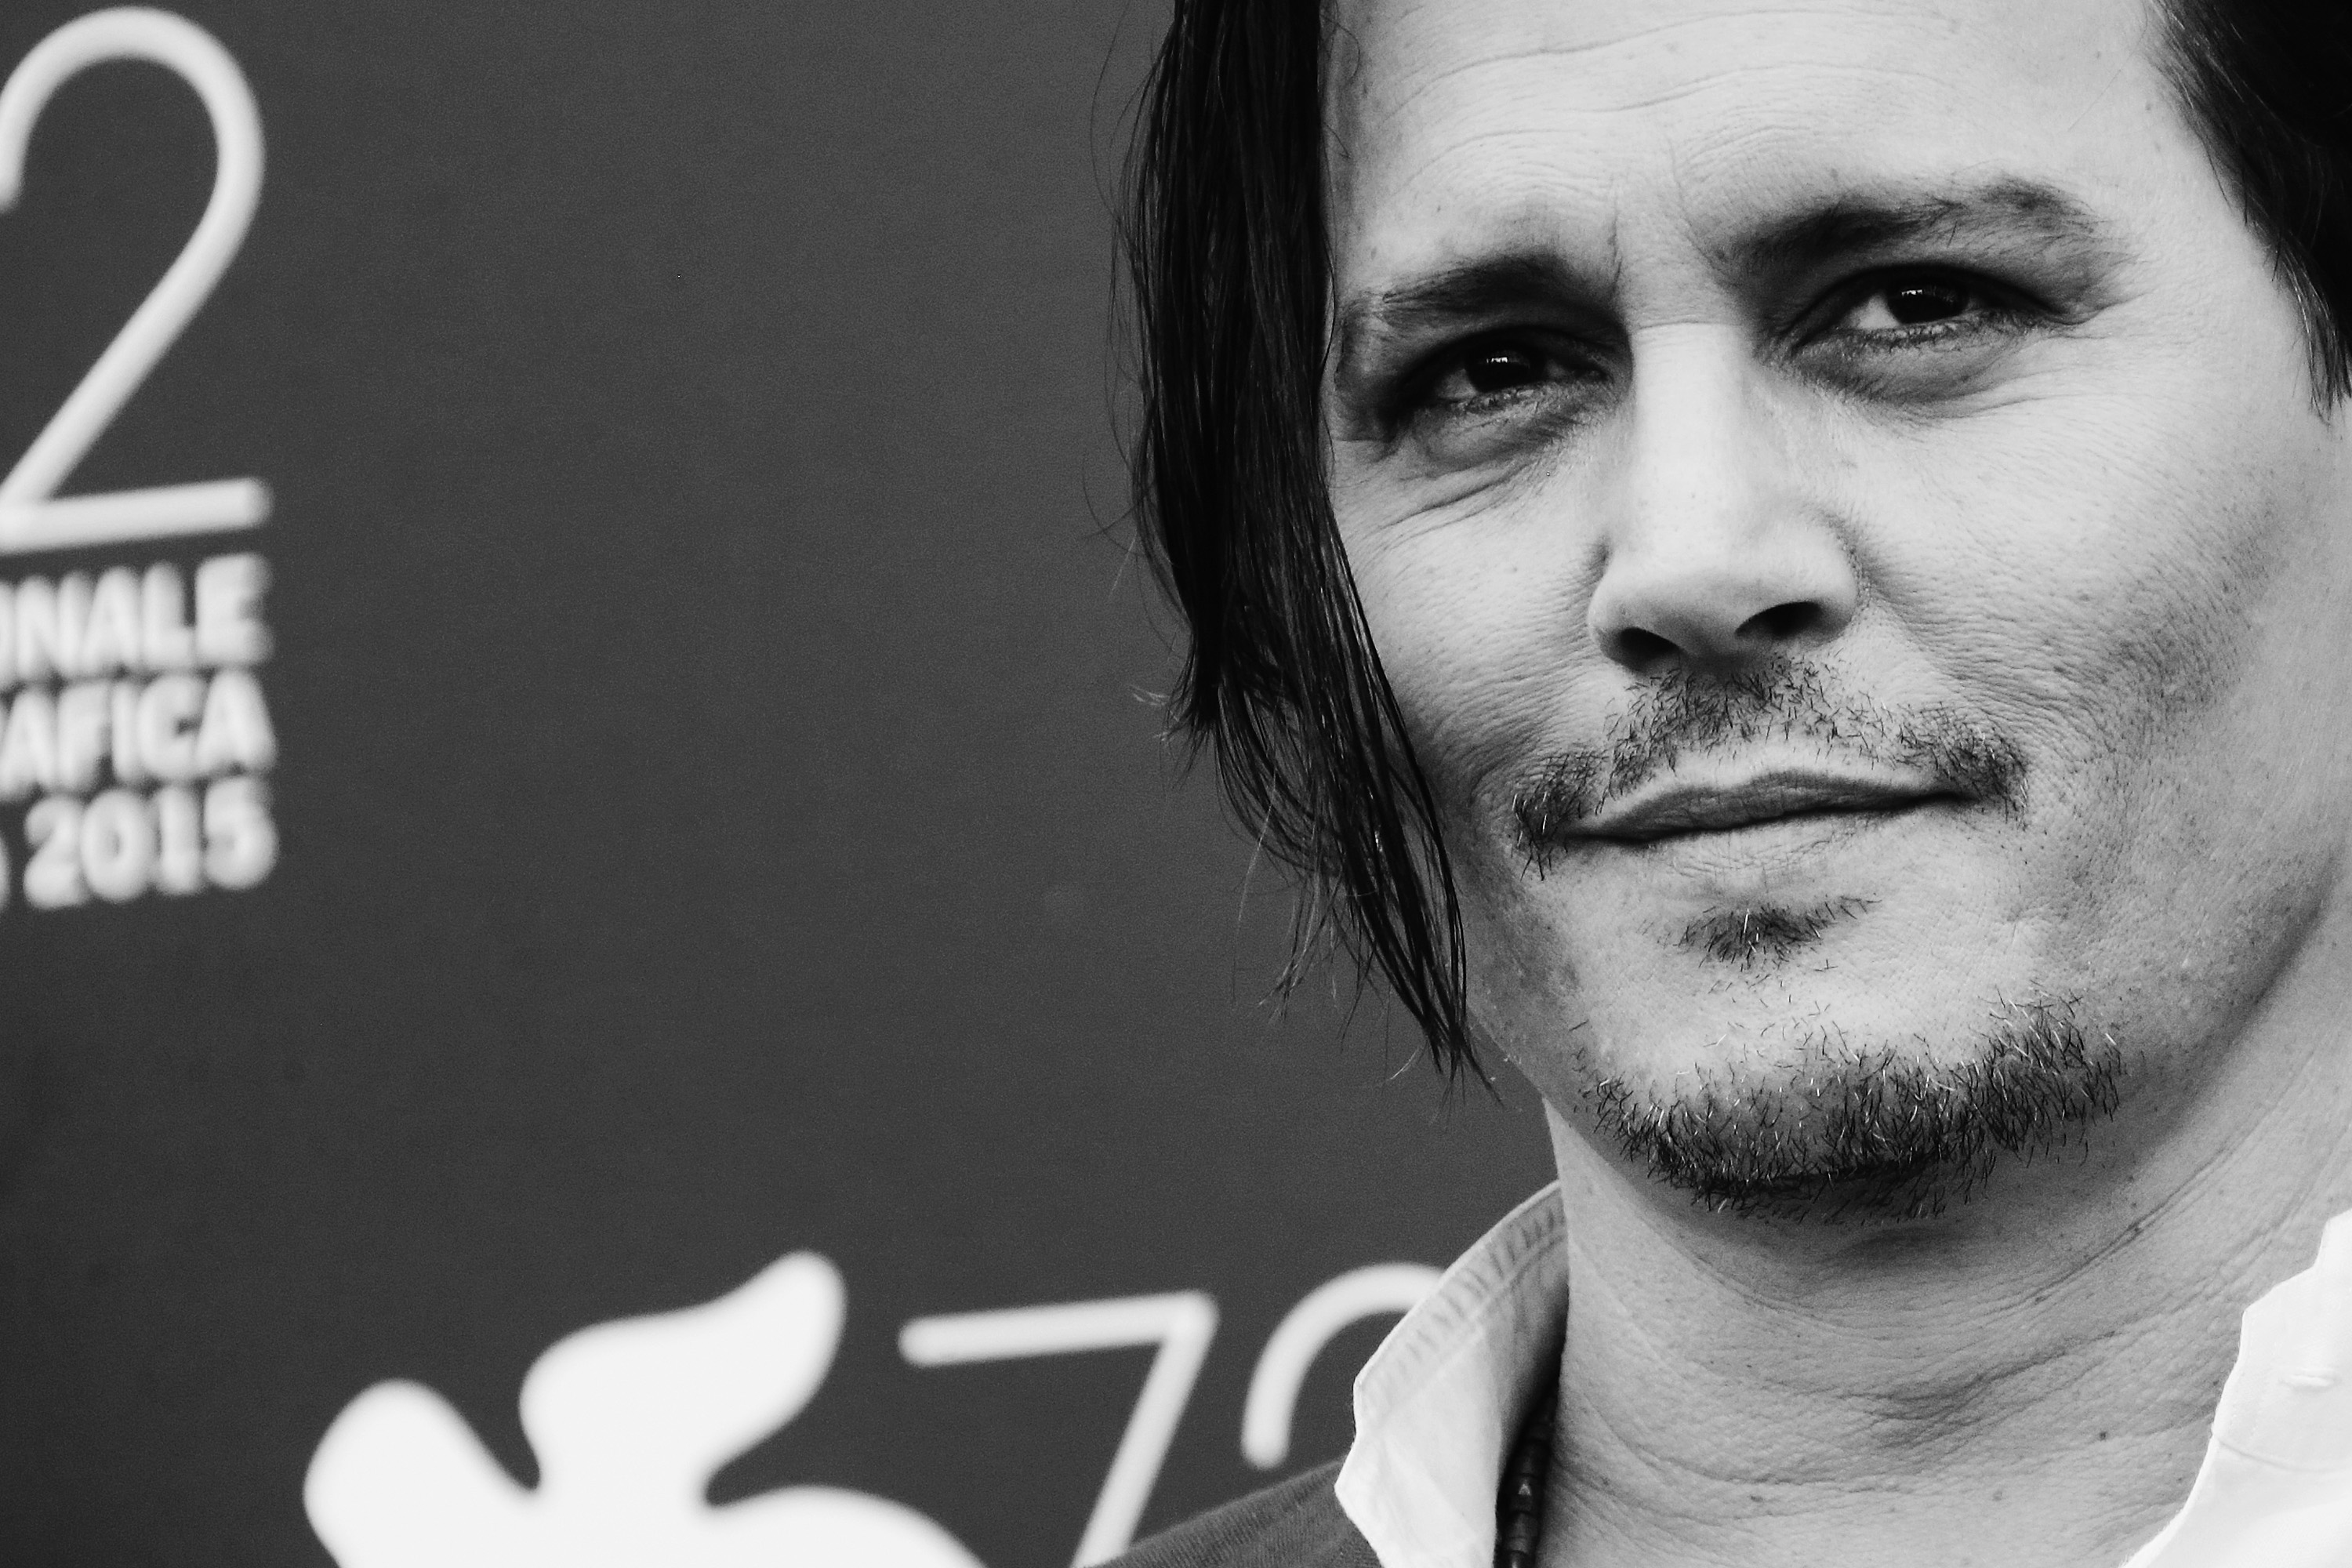 VENICE, ITALY - SEPTEMBER 04: (EDITORS NOTE: Image has been converted to black and white)Johnny Depp attends the 'Black Mass' photocall during the 72nd Venice Film Festival on September 4, 2015 in Venice, Italy. (Photo by Vittorio Zunino Celotto/Getty Images)